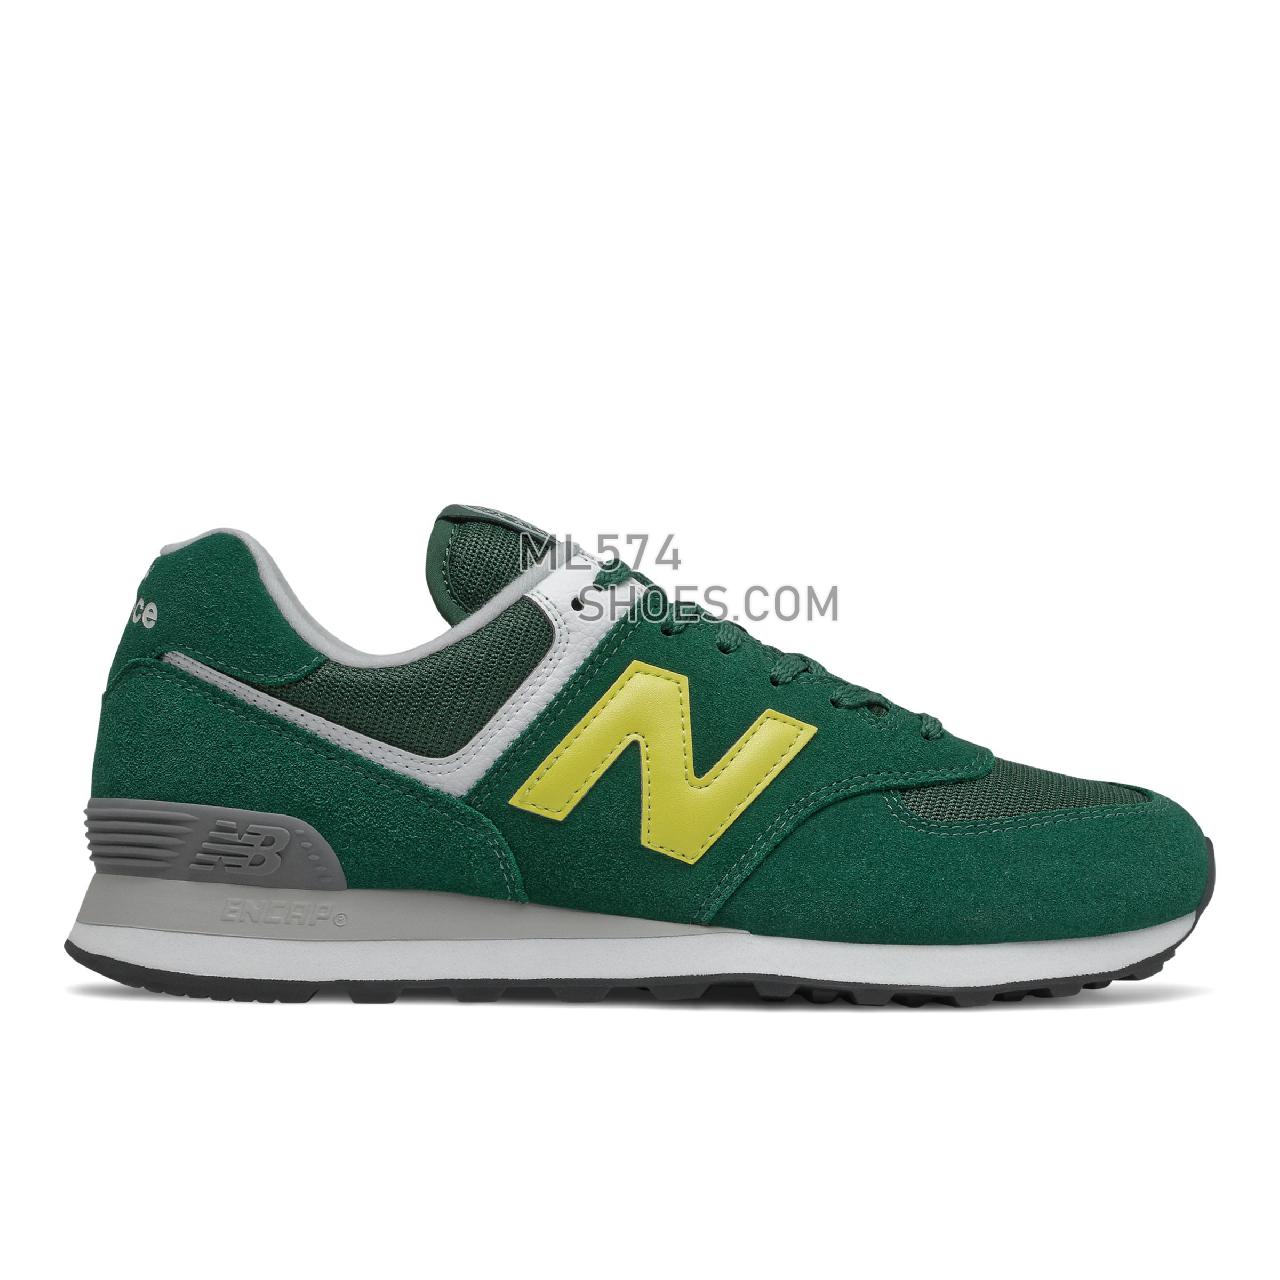 New Balance 574v2 - Men's Classic Sneakers - Nightwatch Green with Yellow - ML574HZ2